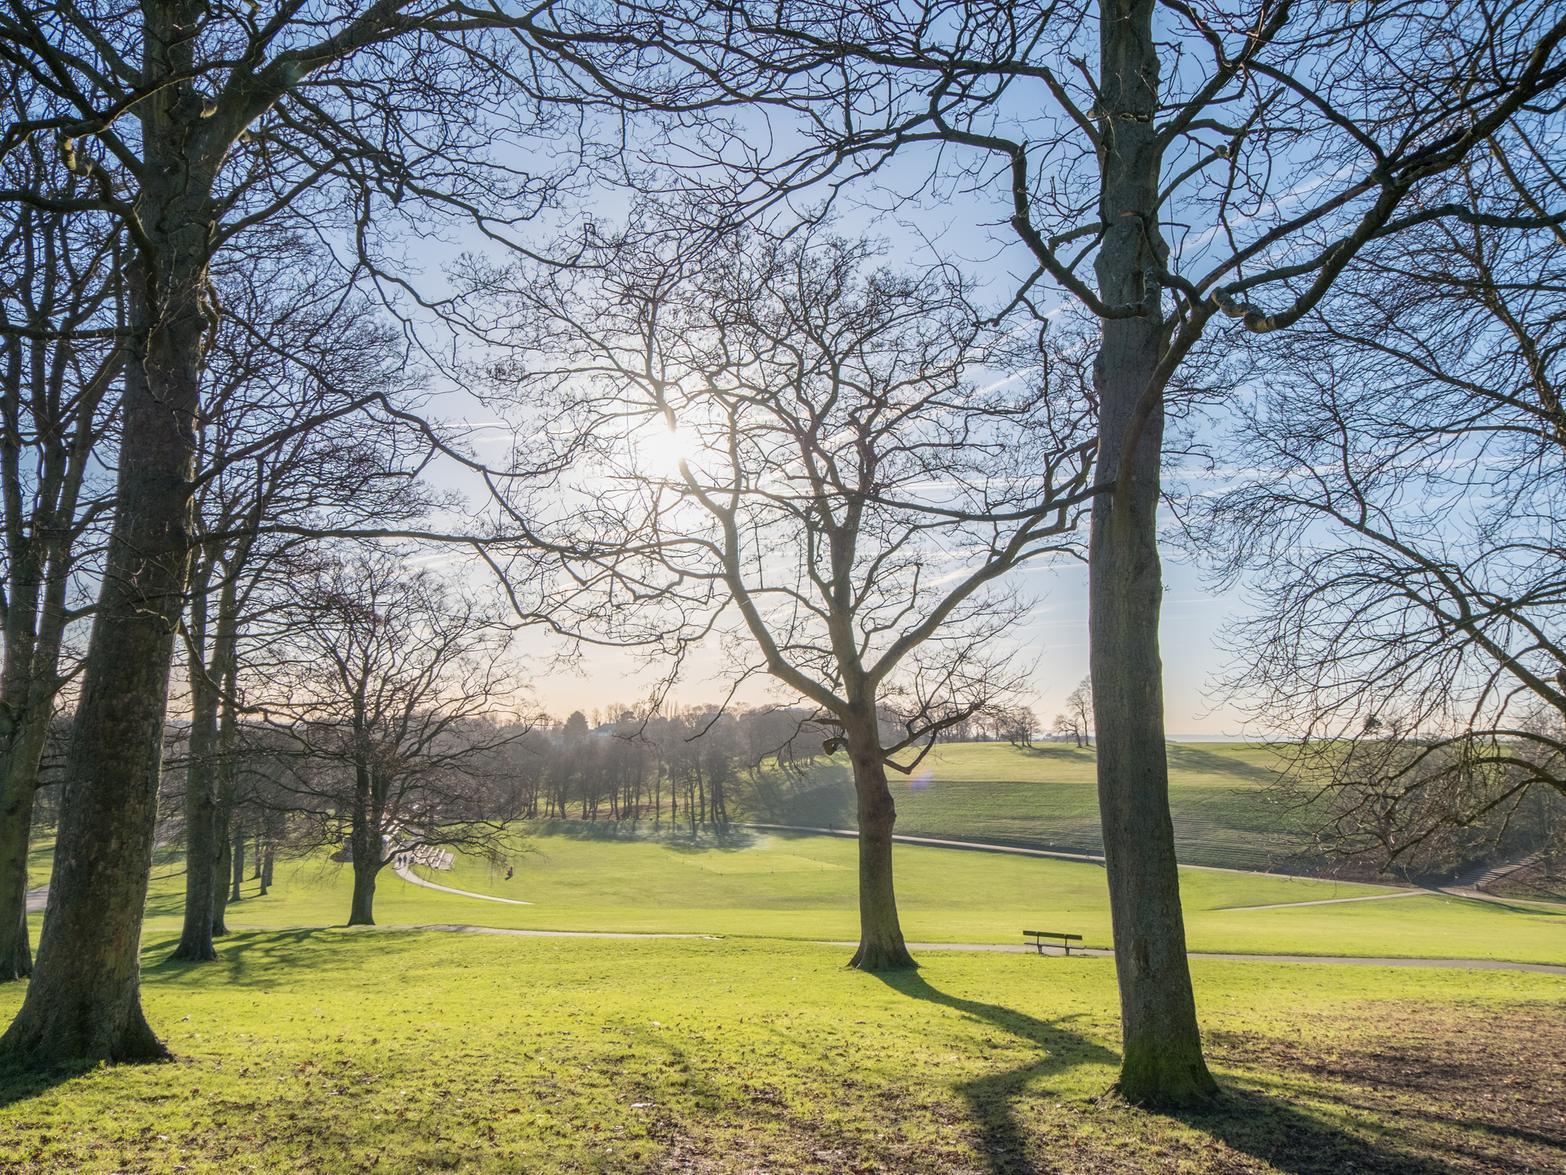 Located in Leeds, this city park has acres of land for you to explore. It includes not only parkland, but woods, lakes and gardens, providing a great escape from the bustling city.